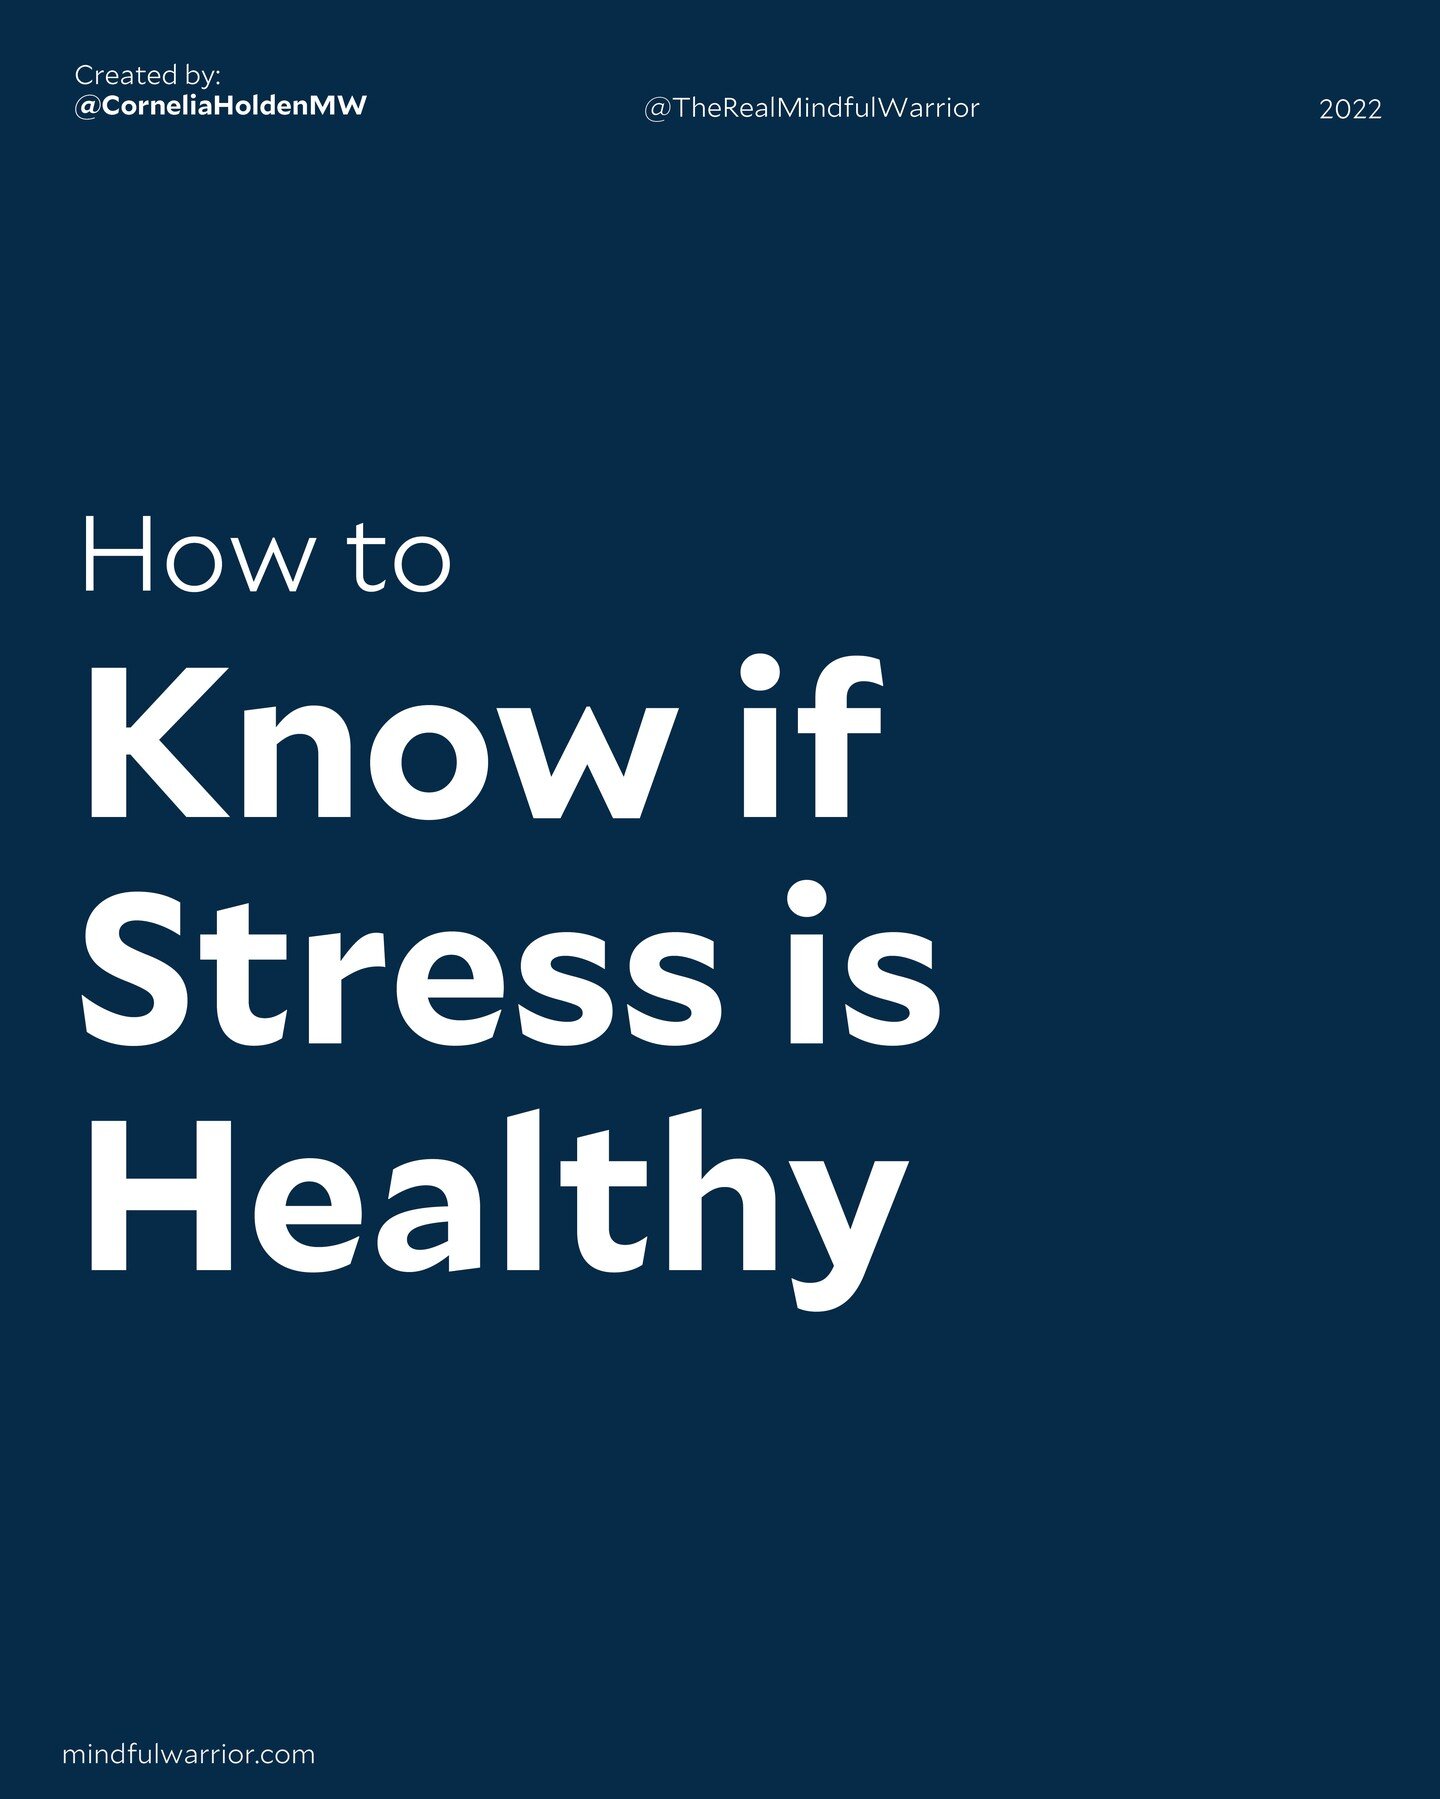 Did you know that stress can be healthy? We often hear of only toxic or unhealthy stress. It&rsquo;s important to recognize that healthy stress can serve a purpose. #mindfulwarrior